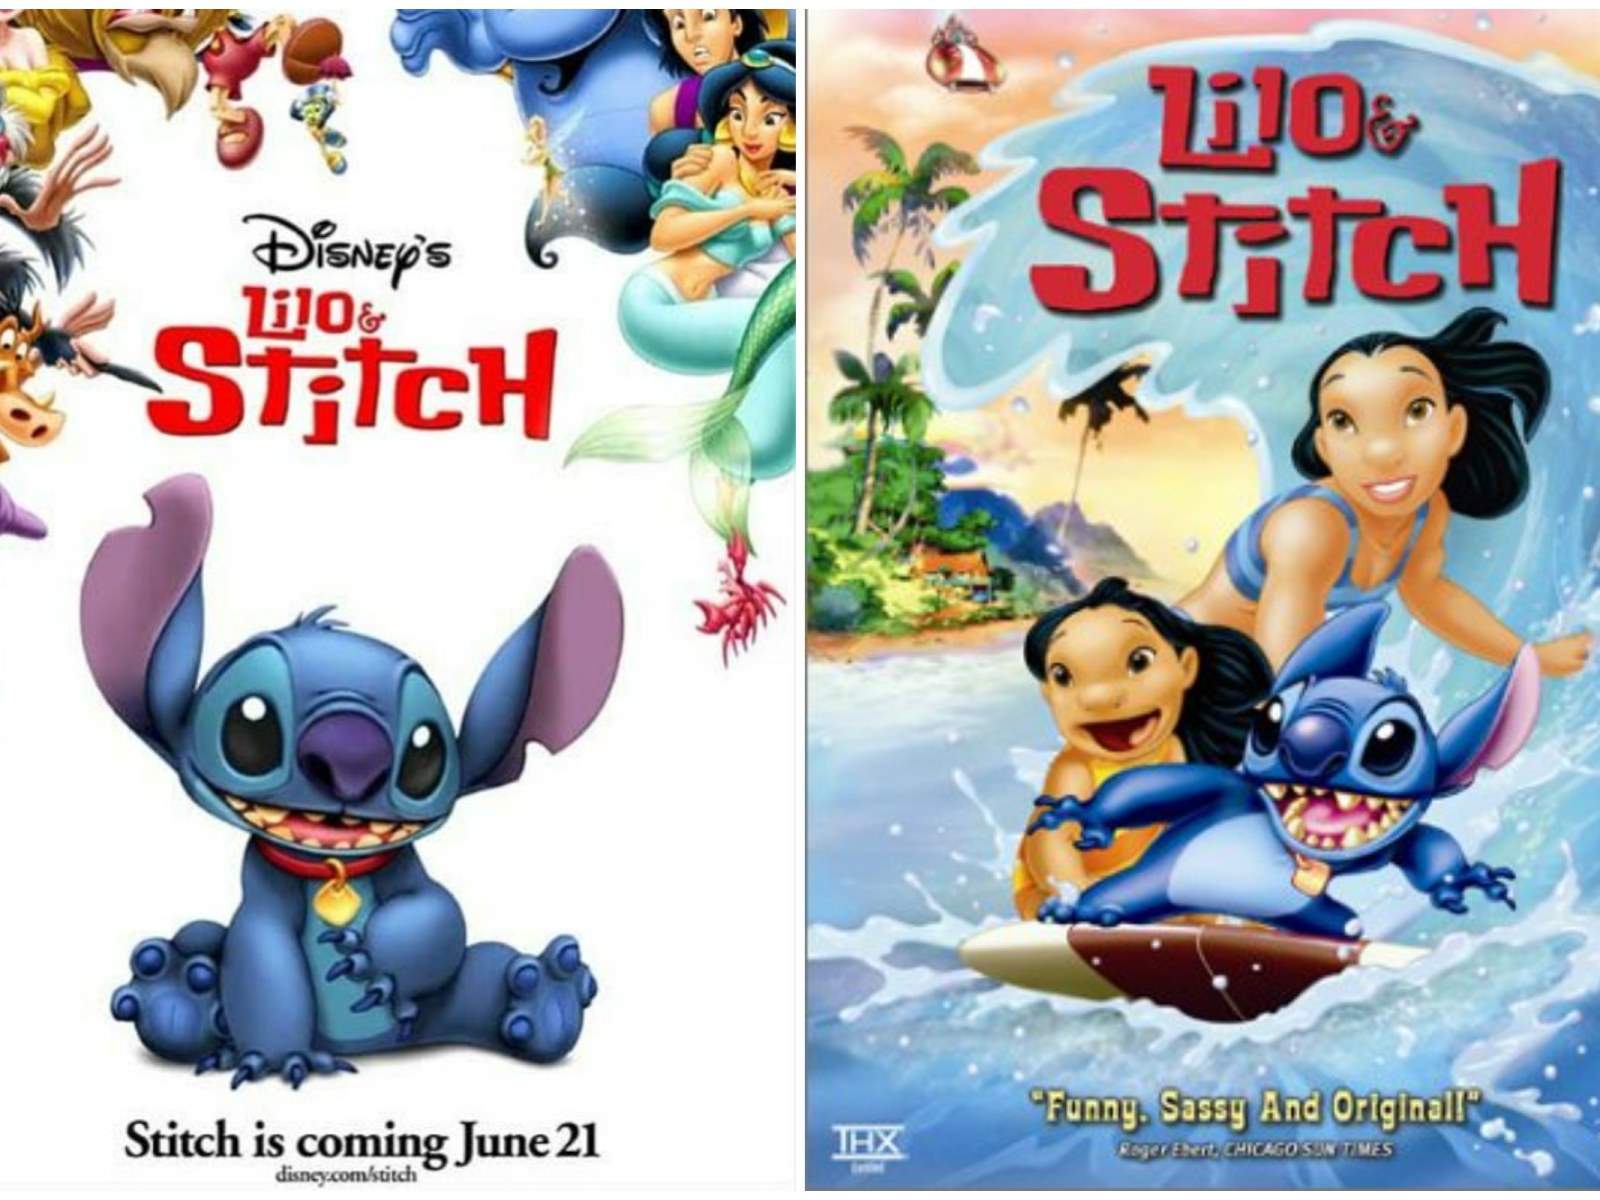 lilo and stitch after all｜TikTok Search